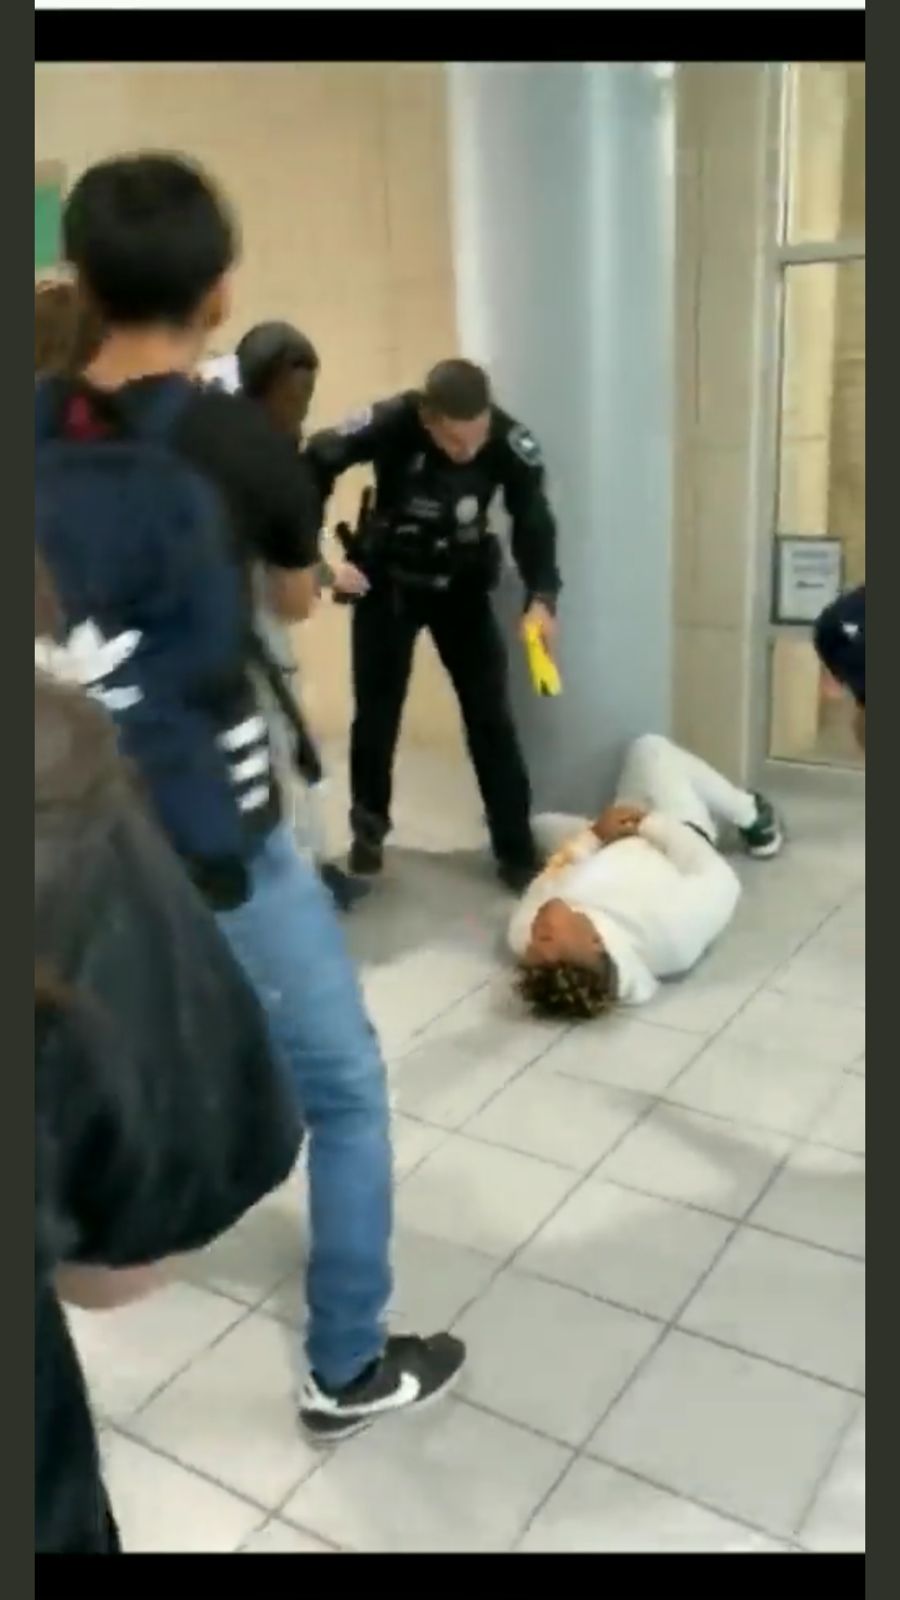 Screengrab: Viral videos on social media show police allegedly using taser guns on high school students in Texas